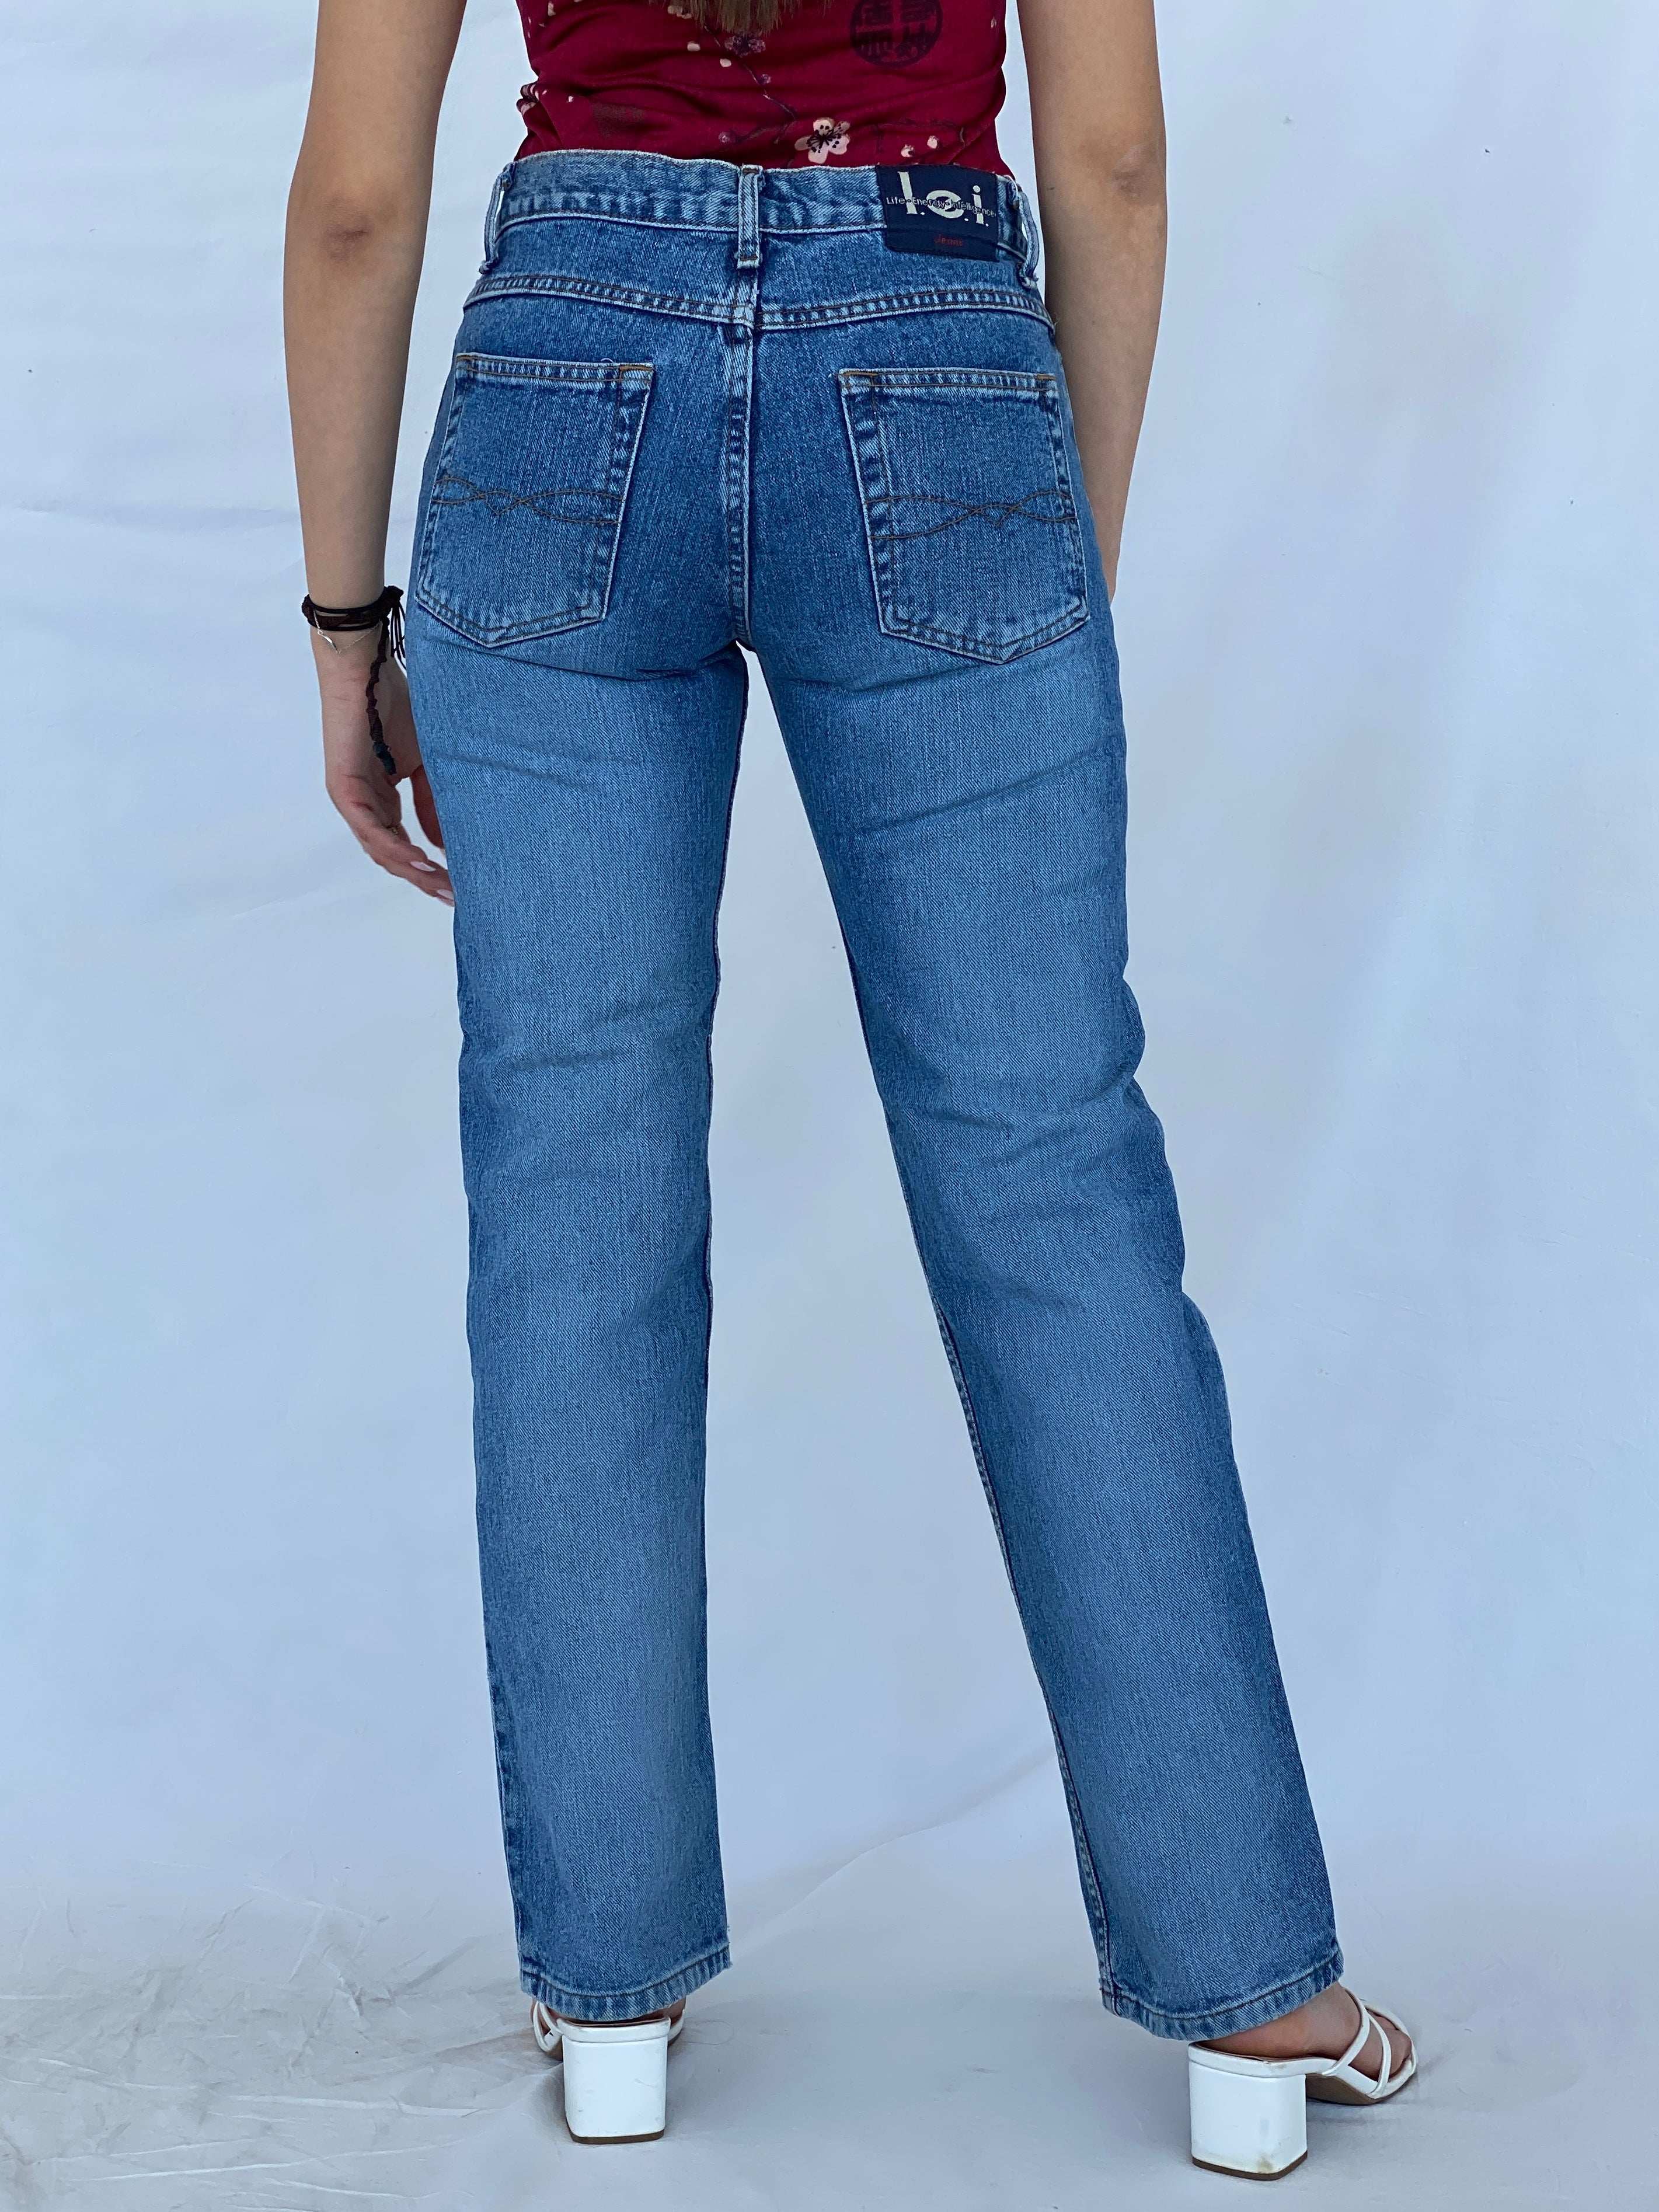 Vintage l.e.i Life.Energy.Intelligence Straight Cut Jeans - Size 38EUR - Balagan Vintage Jeans high waisted jeans, jeans, Juana, levis jeans, NEW IN